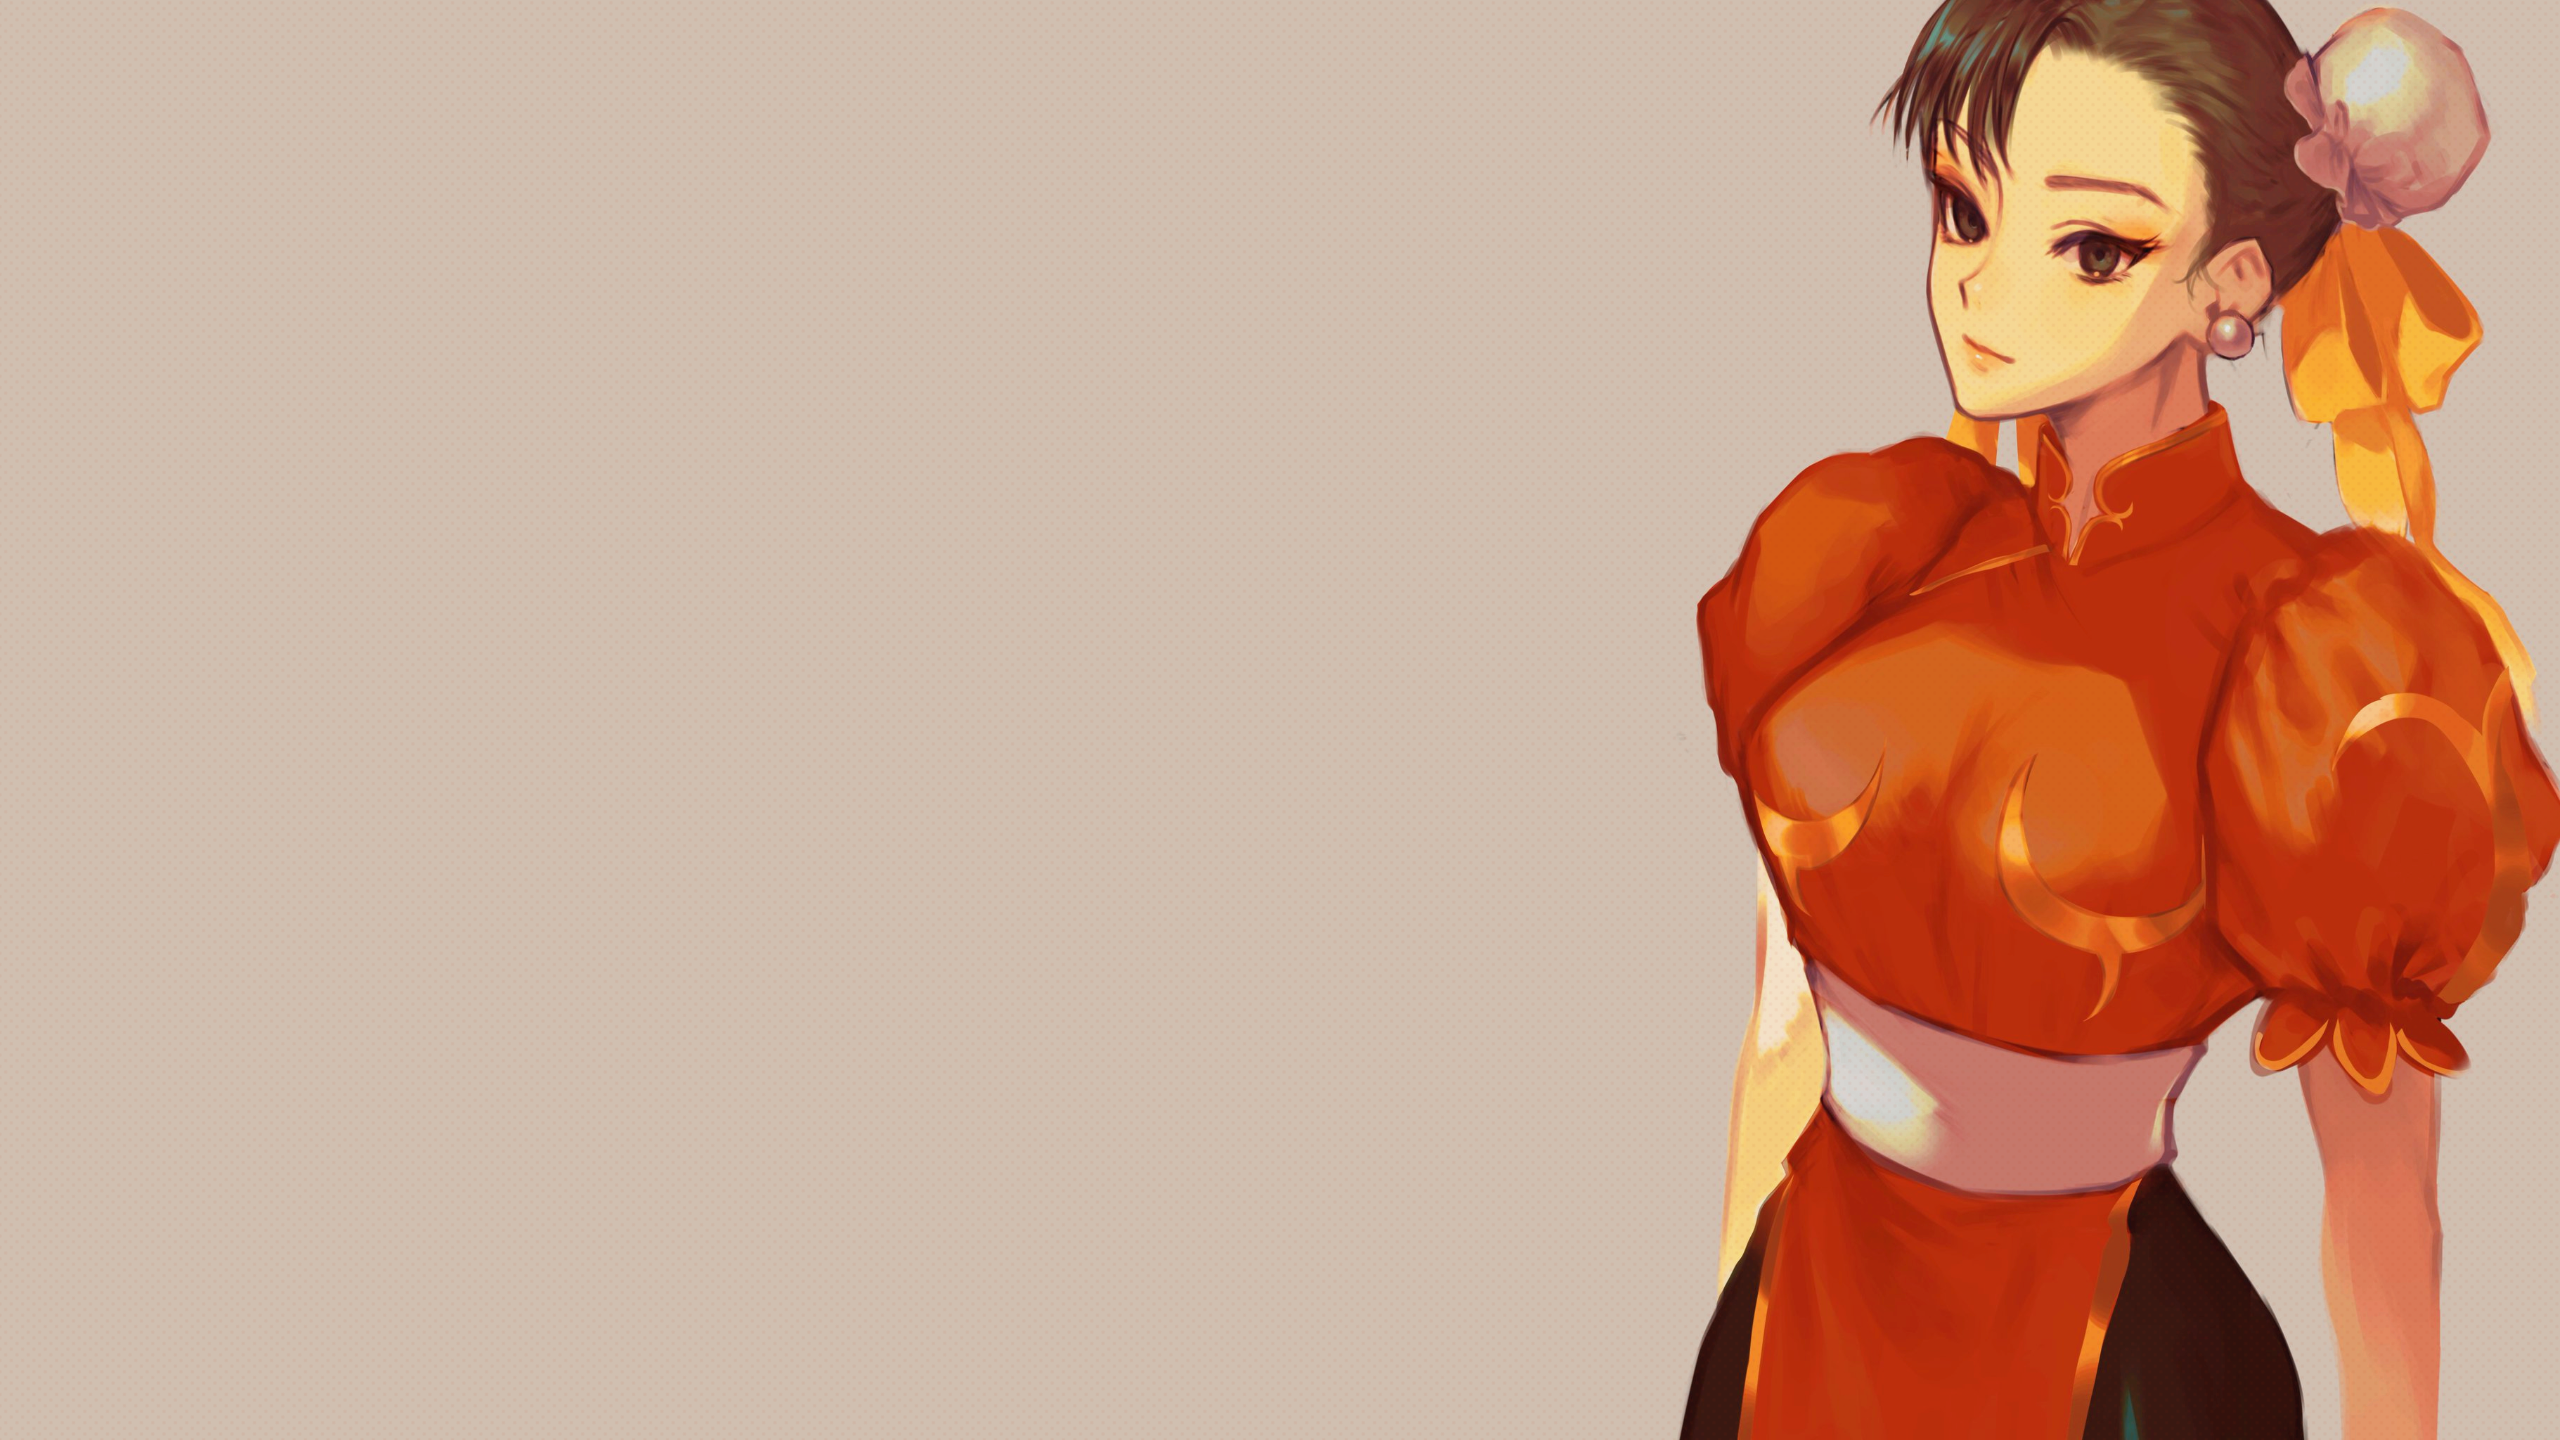 Anime 2560x1440 Chun-Li Street Fighter video games thighs shoulder pads twin buns brunette Traditional Chinese clothing video game girls fighting games ribbon leggings red clothing sash earring simple background alternate costume minimalism